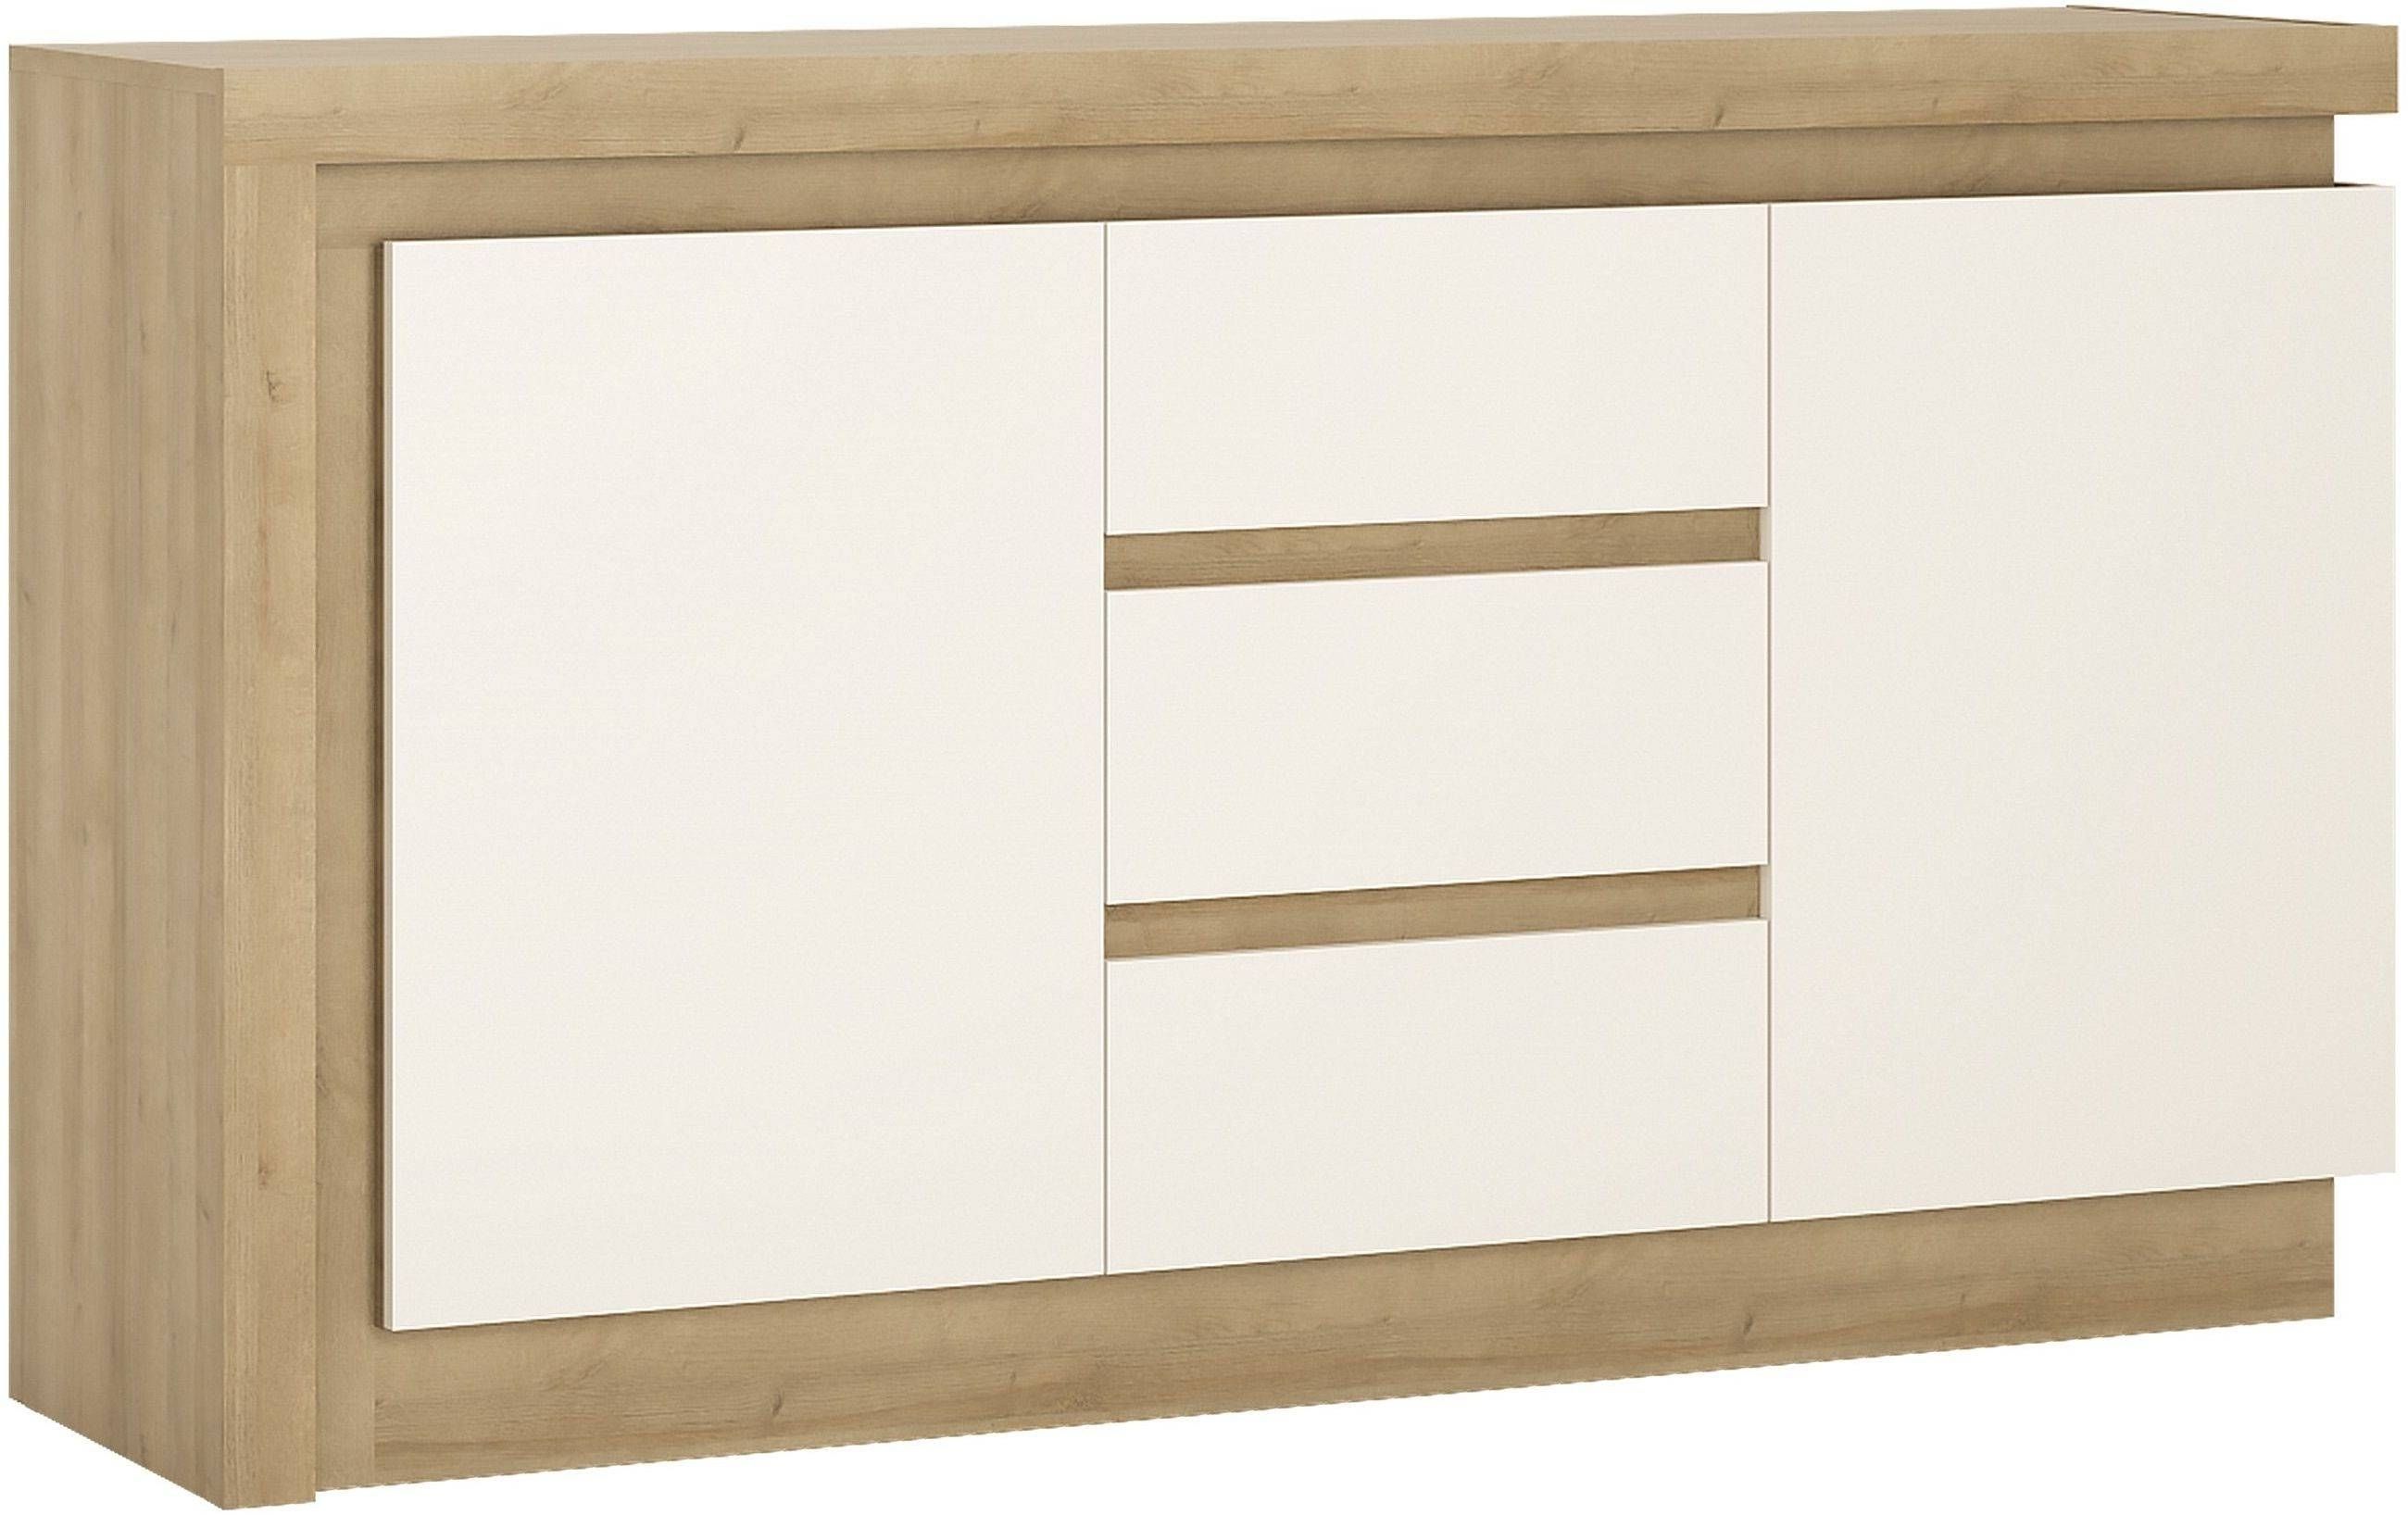 Buy Lyon Riviera Oak And White High Gloss Sideboard – 2 Door 3 Throughout High Gloss Sideboards (View 3 of 20)